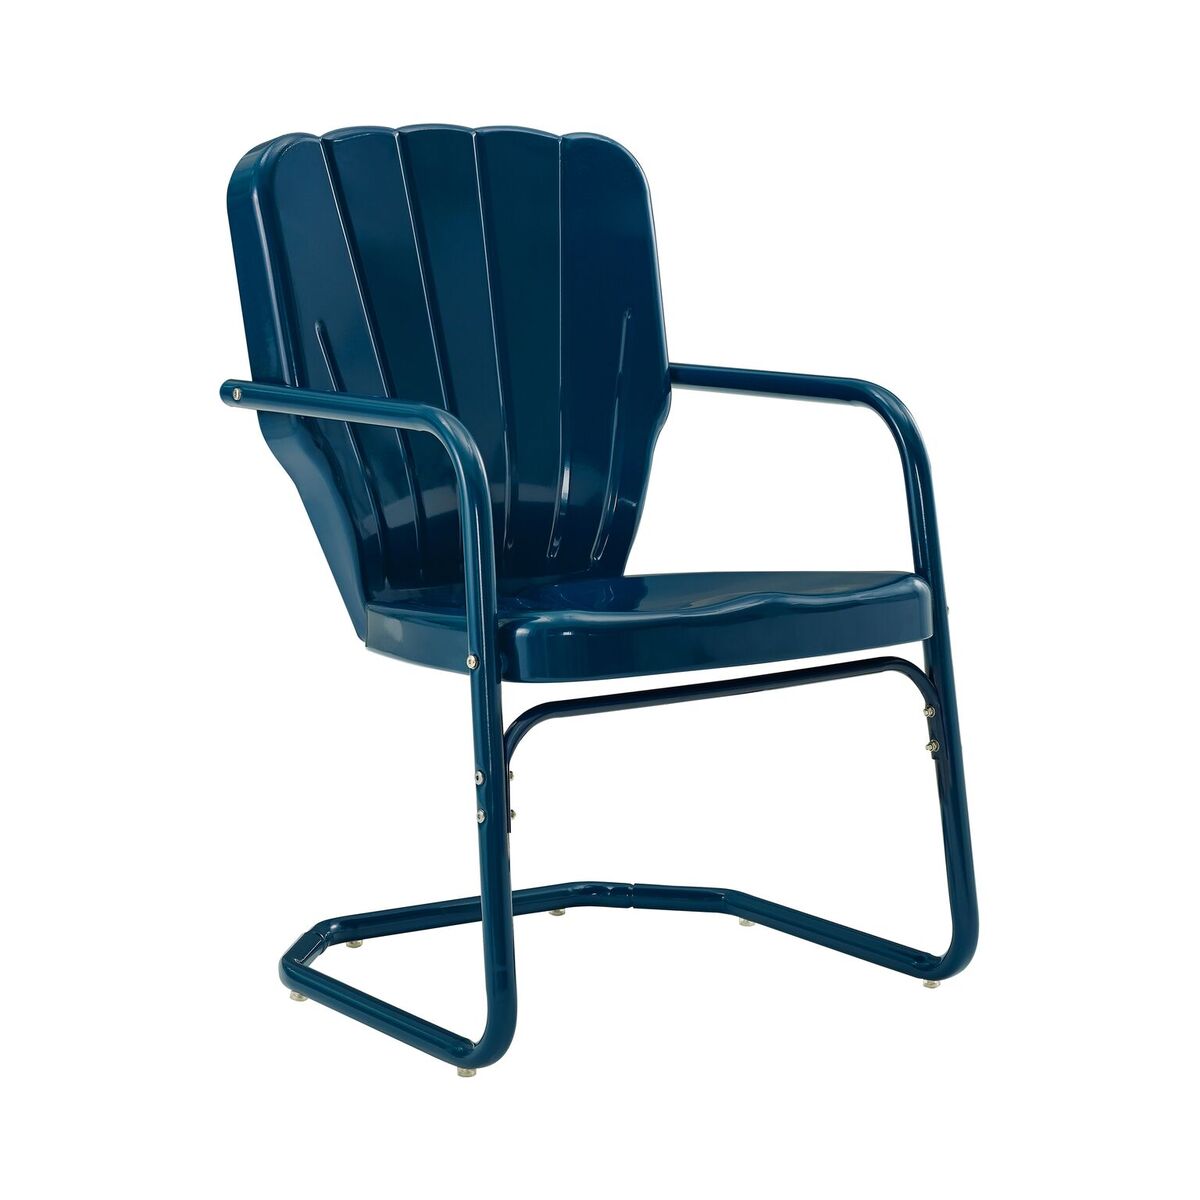 Picture of Crosley Furniture CO1031-NV Ridgeland Metal Chair, Navy Gloss - Set of 2, 34.25 x 19.5 x 23.25 in.